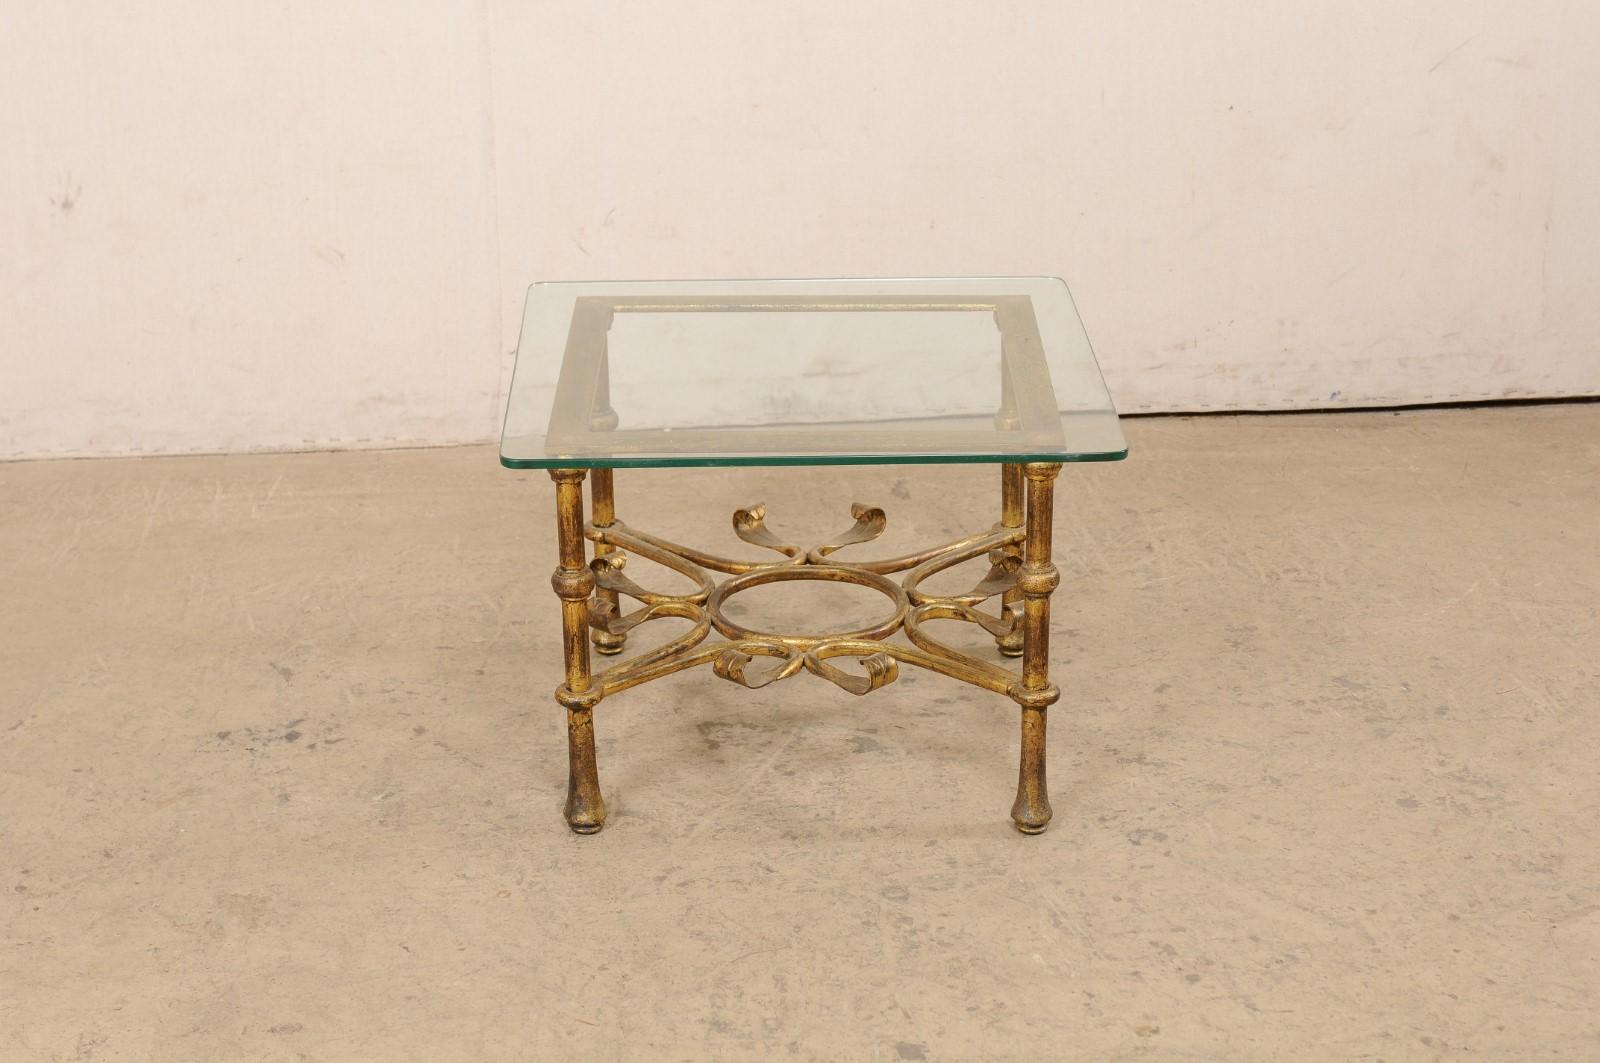 Spanish Accent Table with Gilt Iron Base & Square-Shaped Glass Top, Mid 20th C. For Sale 4